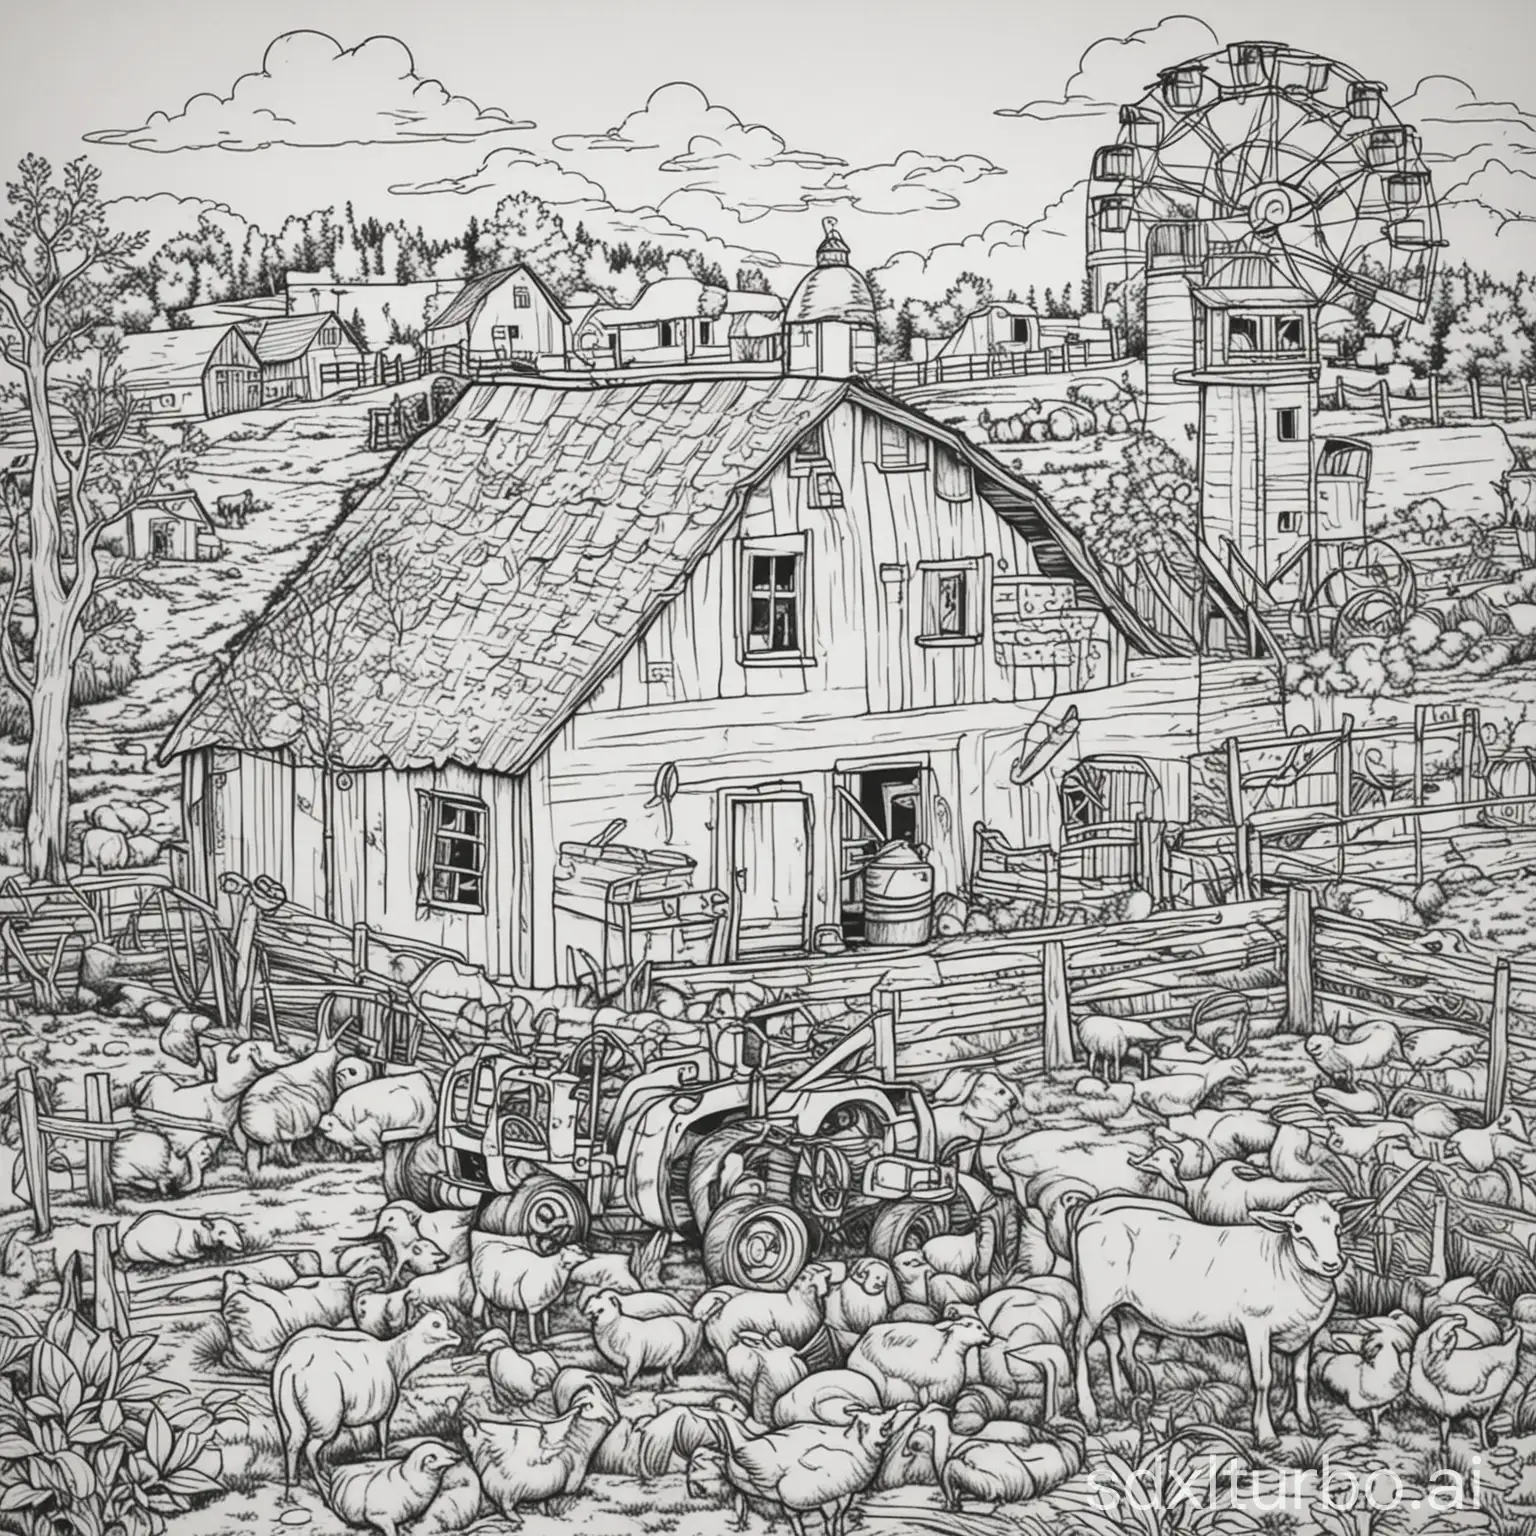 Outline-Farm-Coloring-Page-for-Artistic-Expression